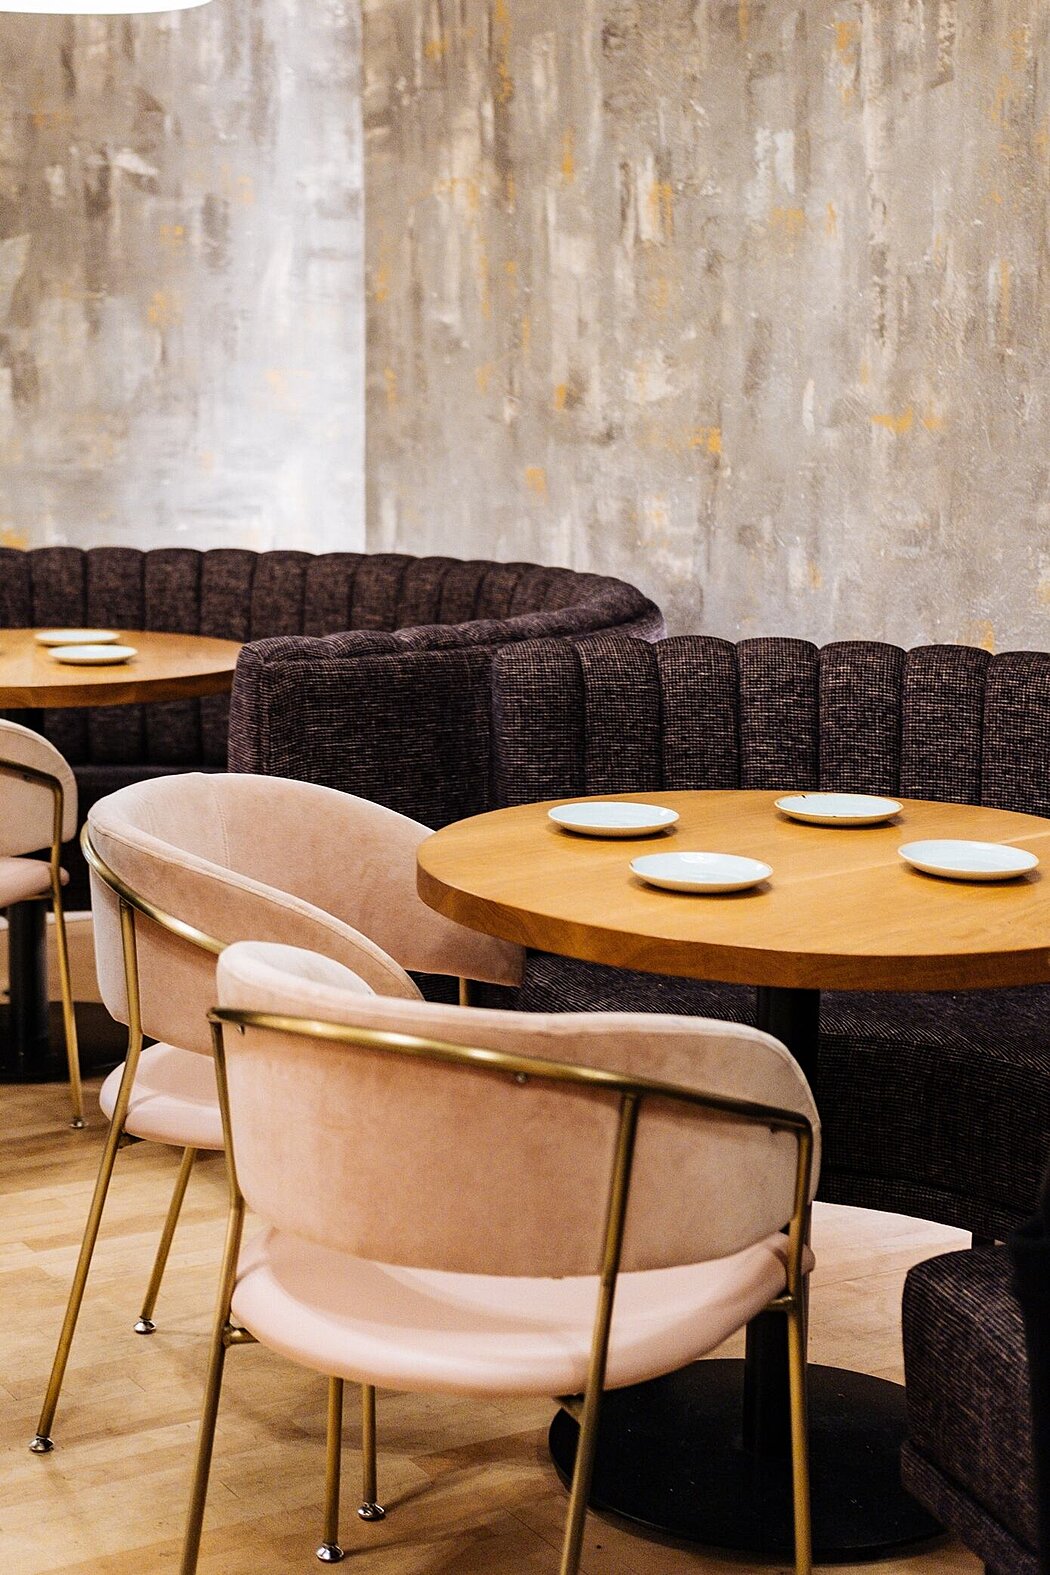 How To Choose The Right Restaurant Booths For Your Space - 1